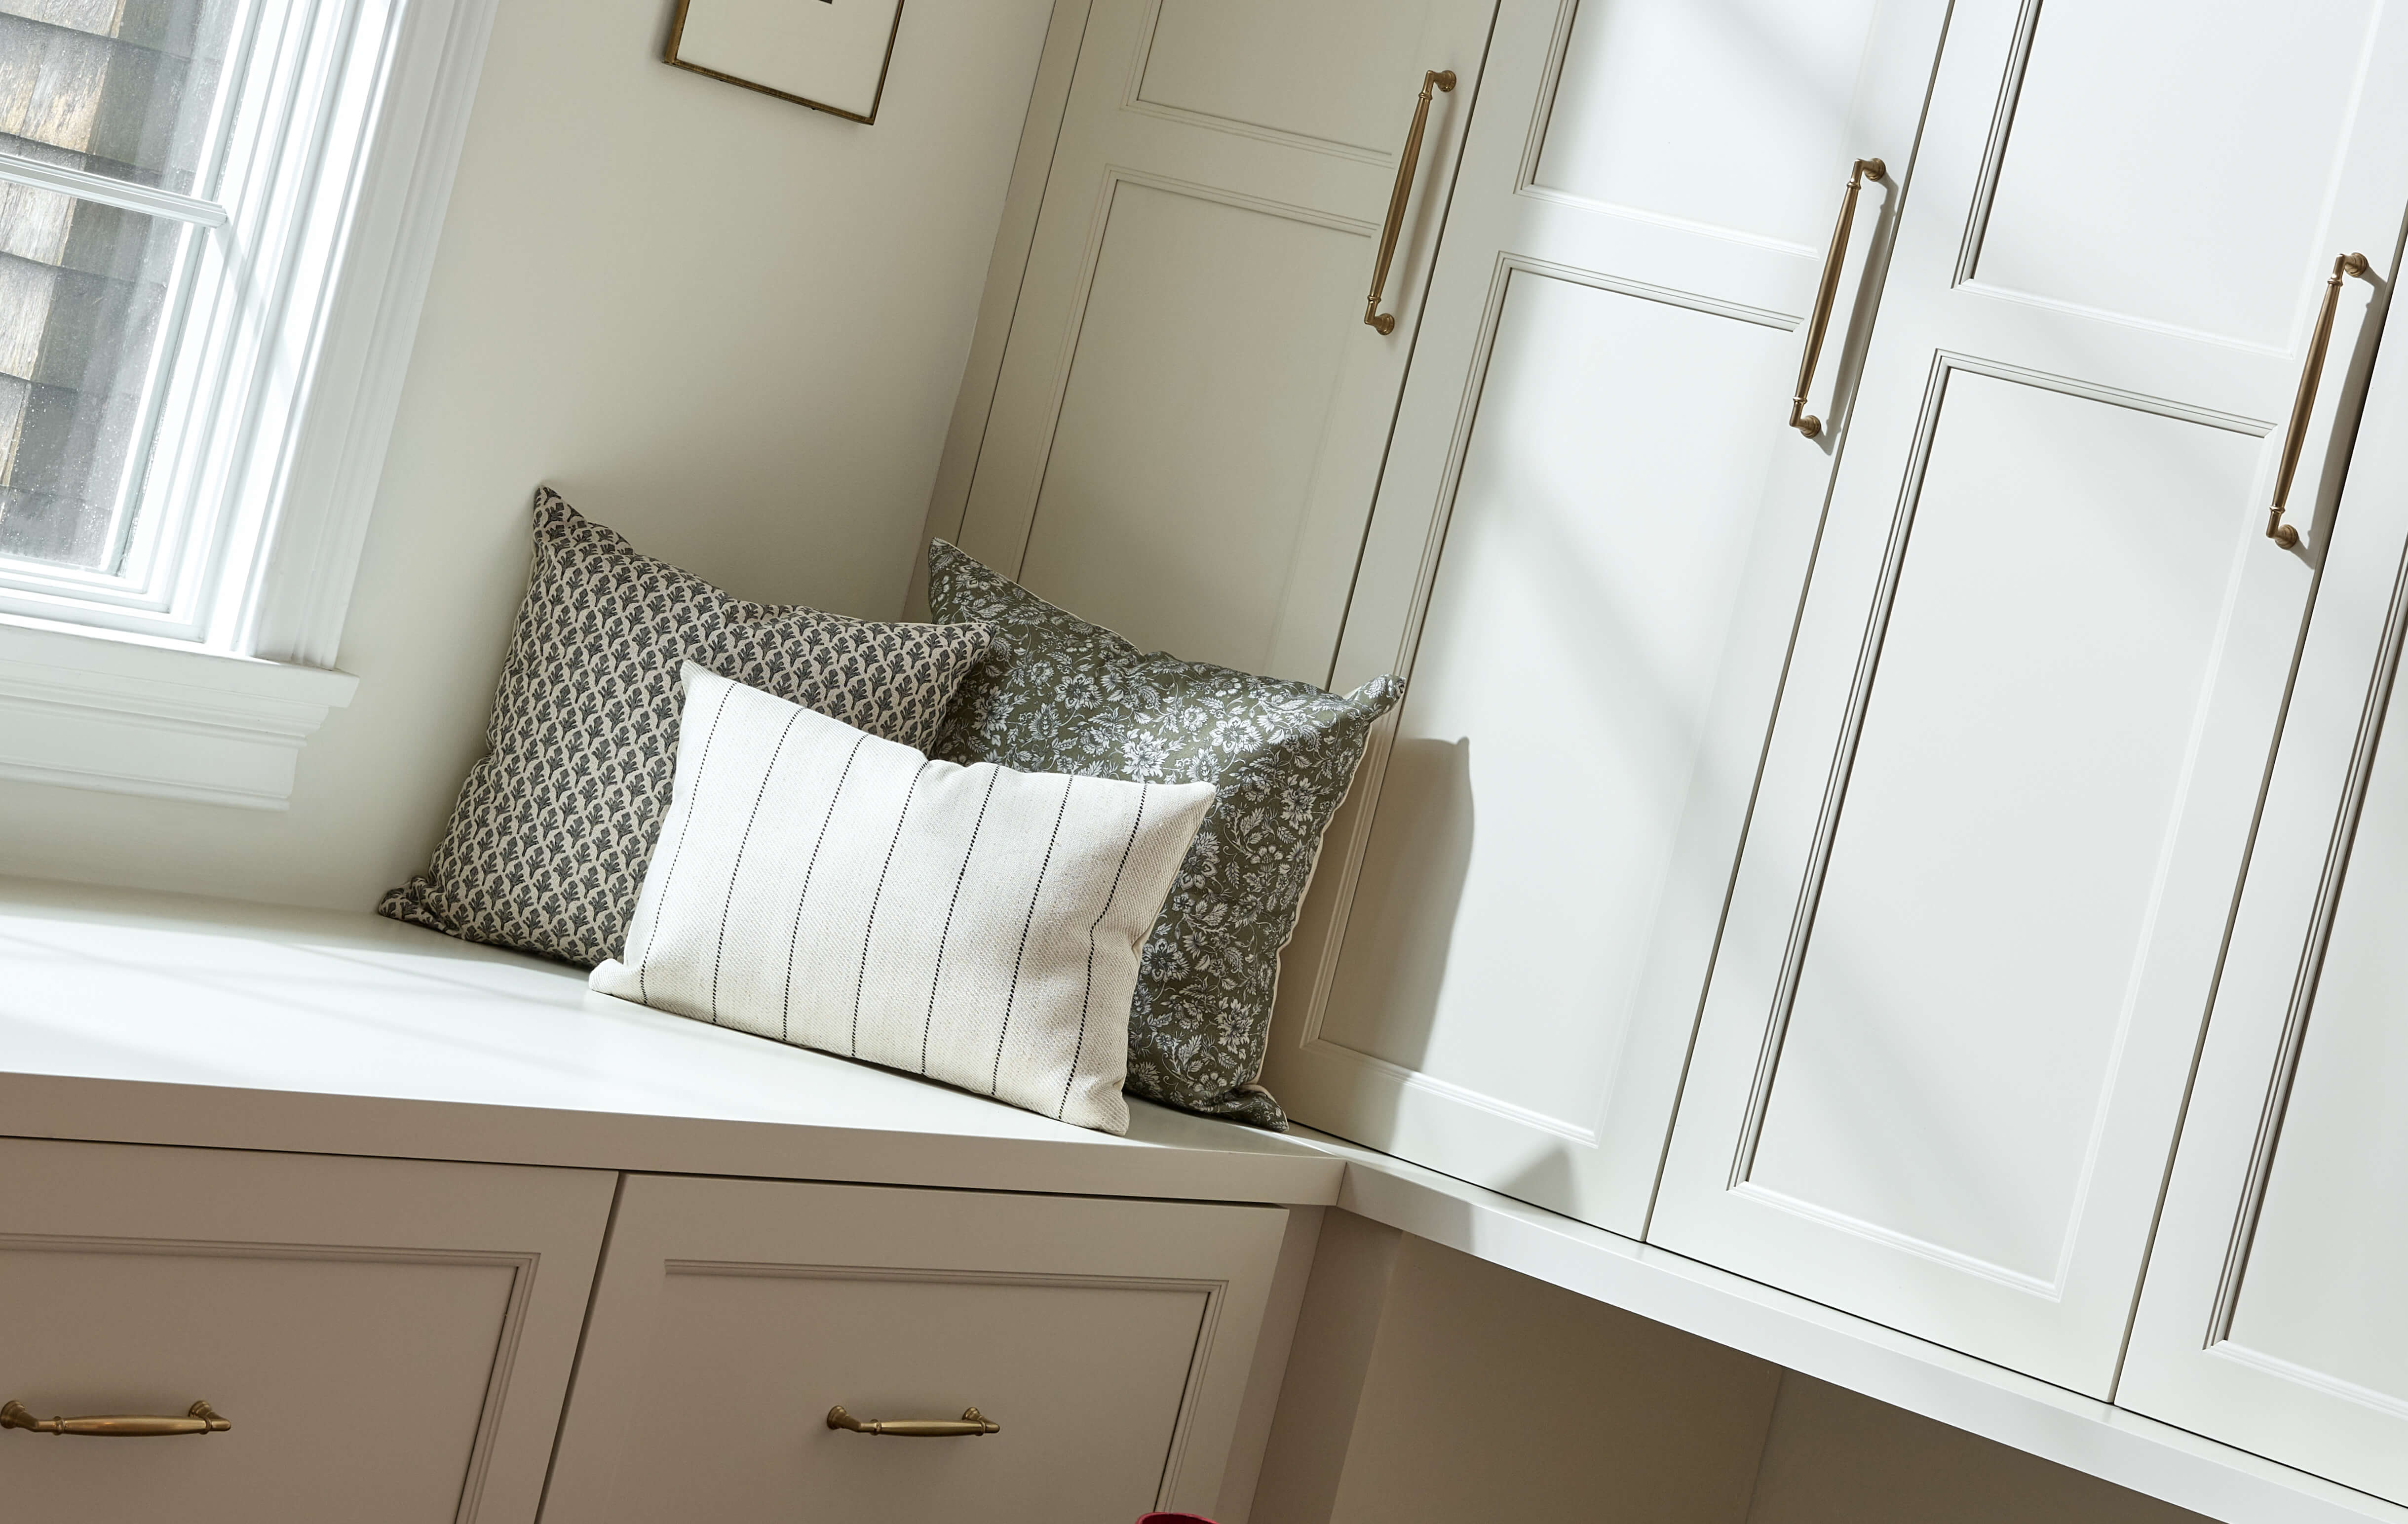 A closet design with a bootbench under a window and white painted cabinets from Dura Supreme.